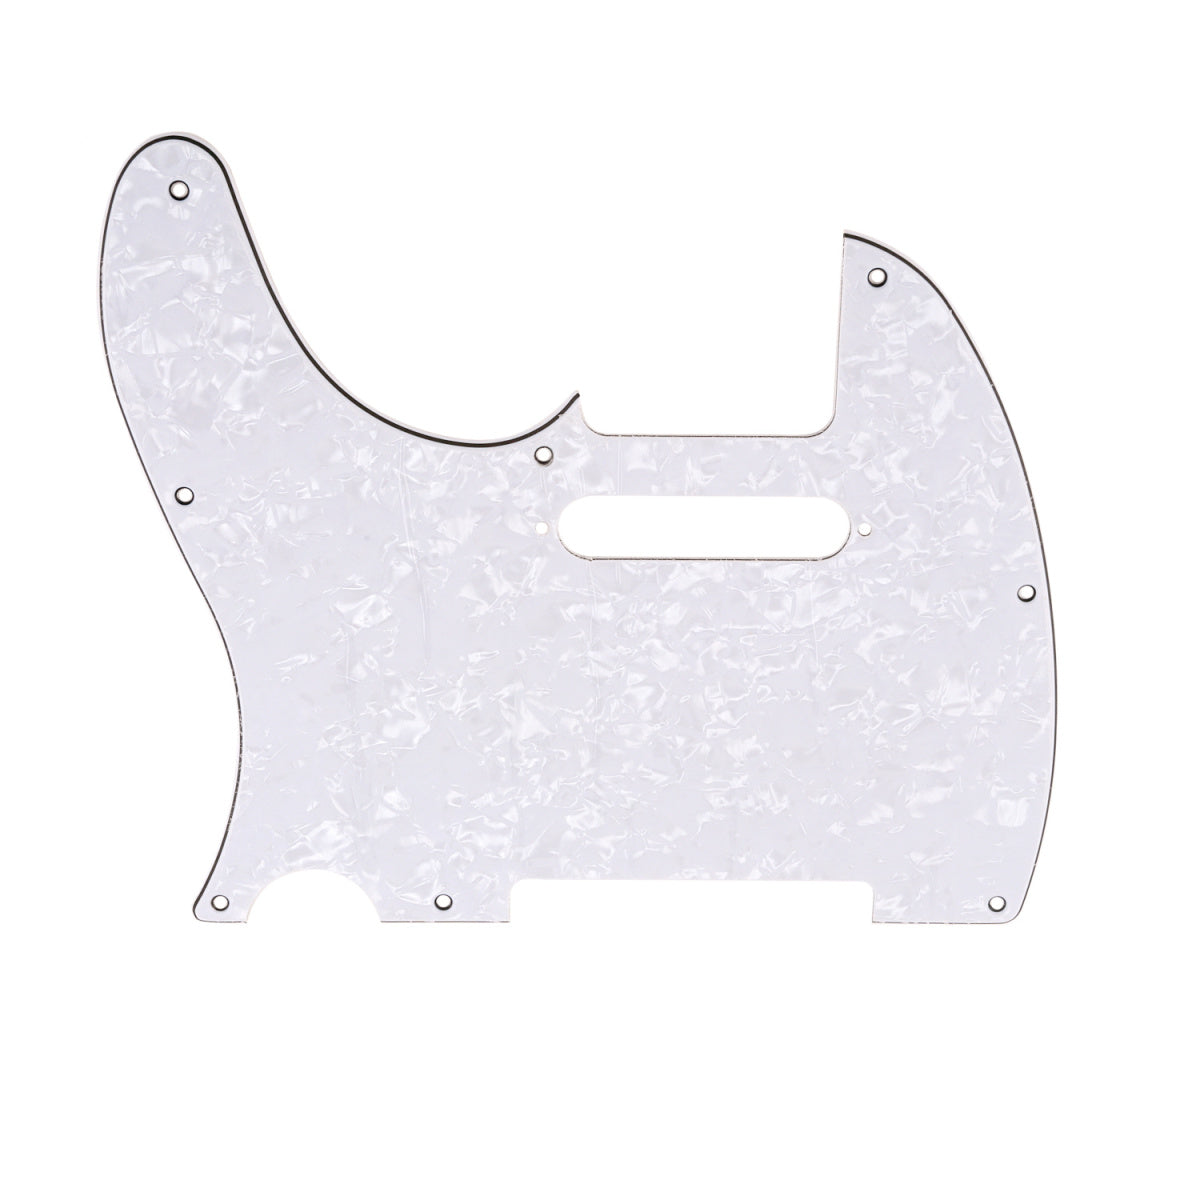 Musiclily Left Handed 8 Hole Guitar Tele Pickguard for American/Mexican Made Fender Telecaster Standard Modern Style, 4Ply White Pearl